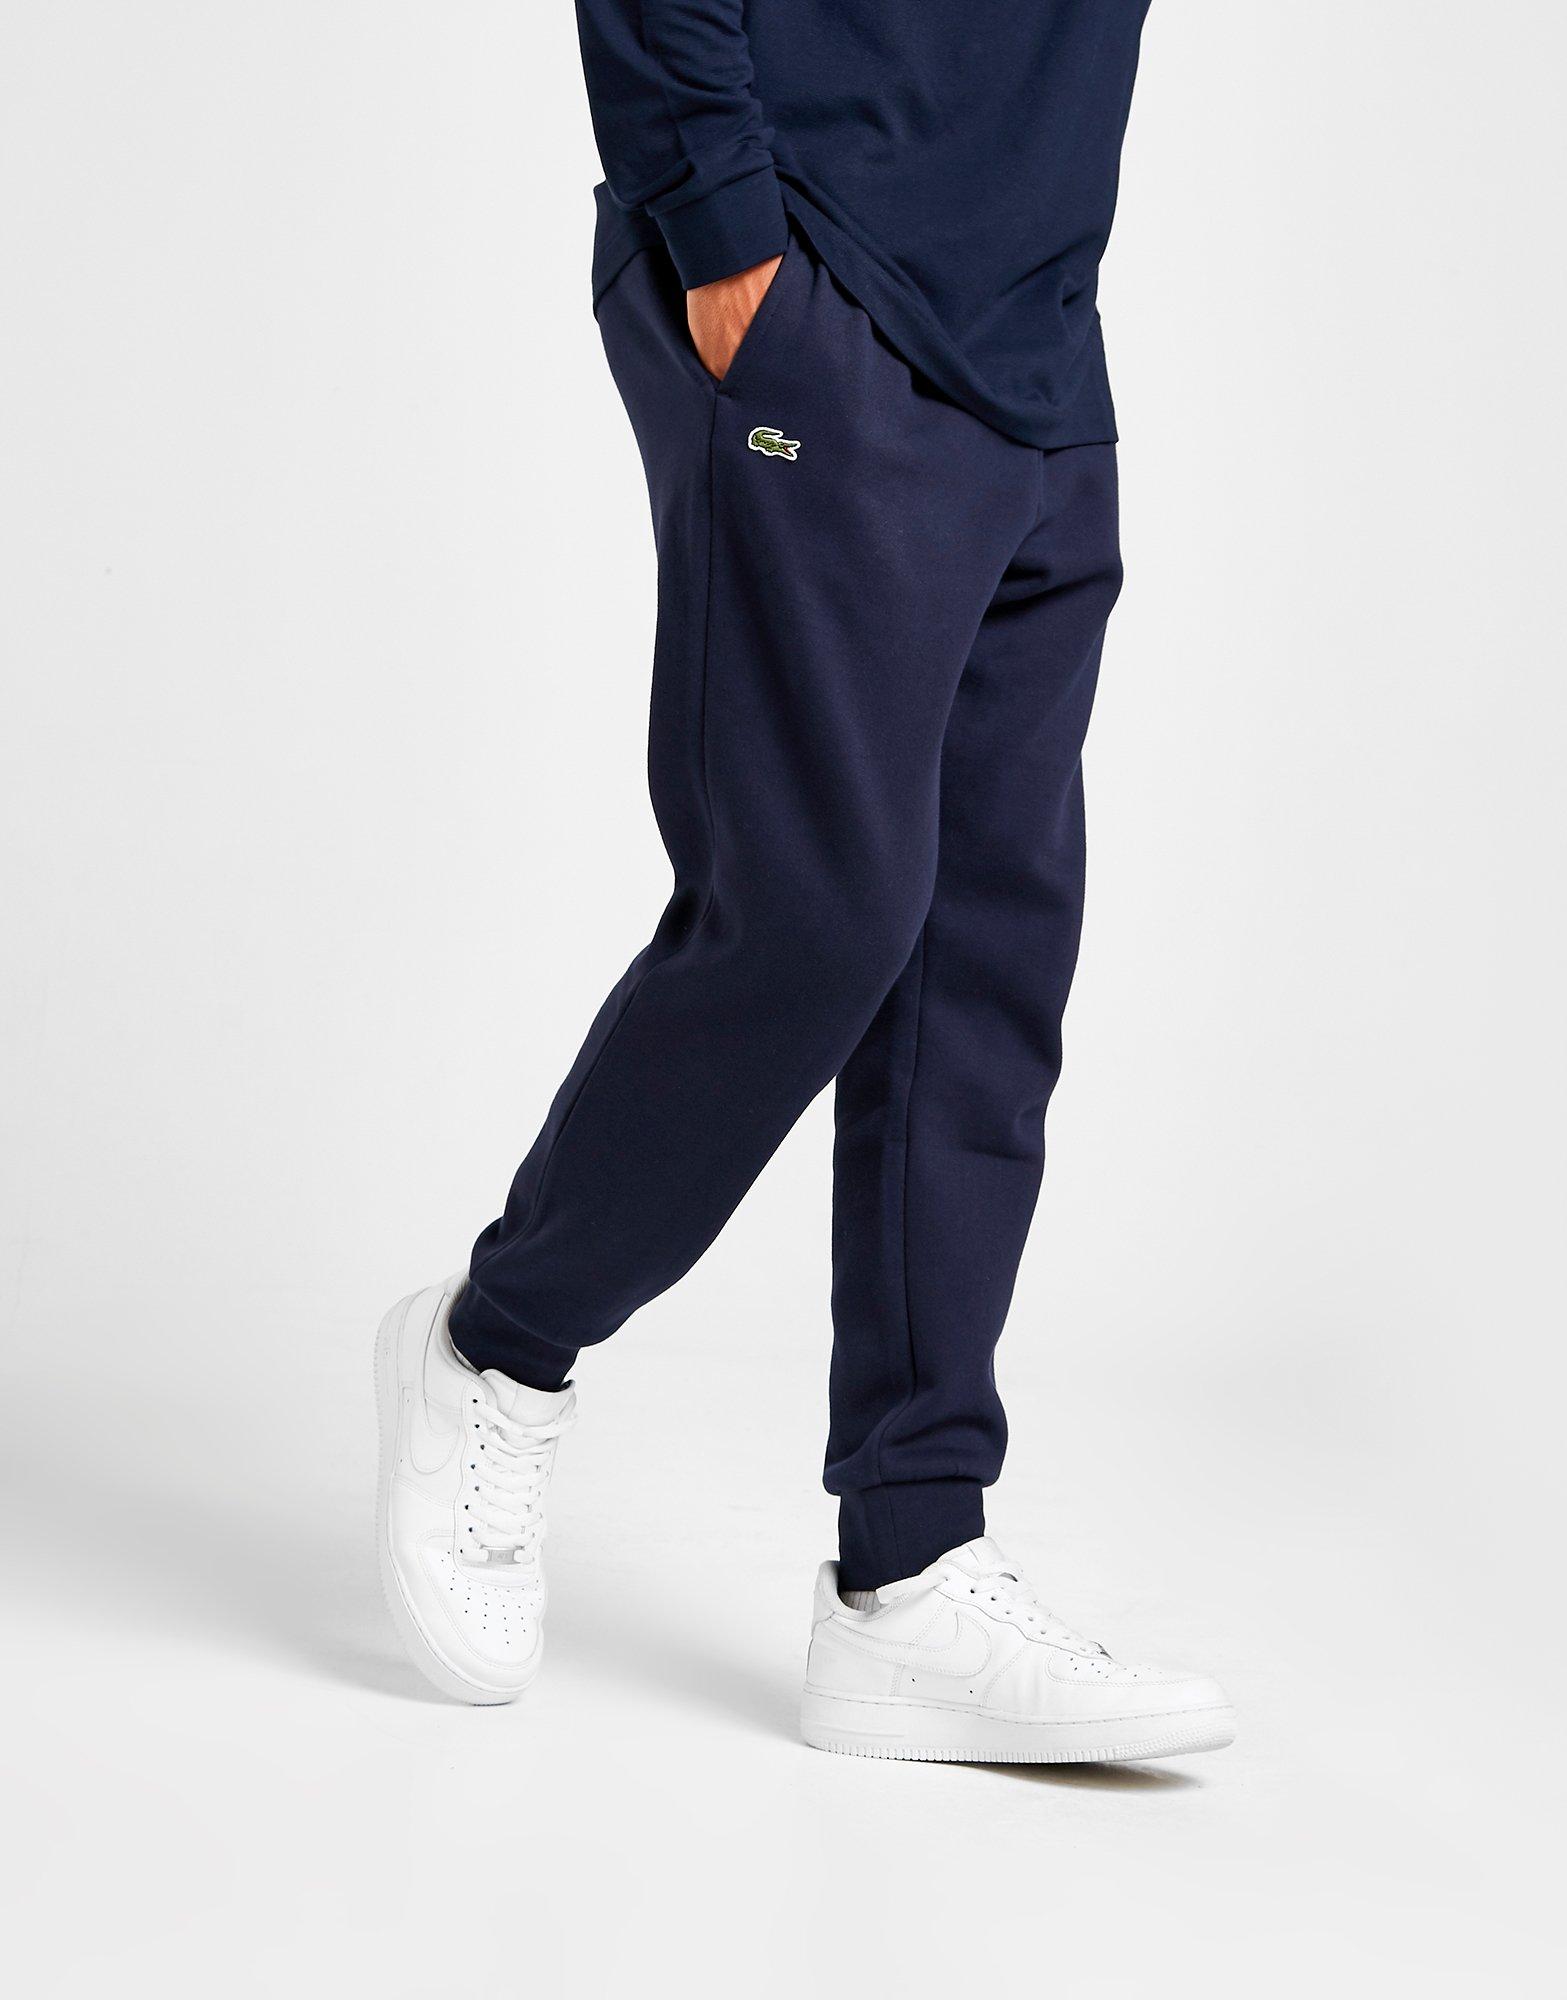 jd lacoste joggers